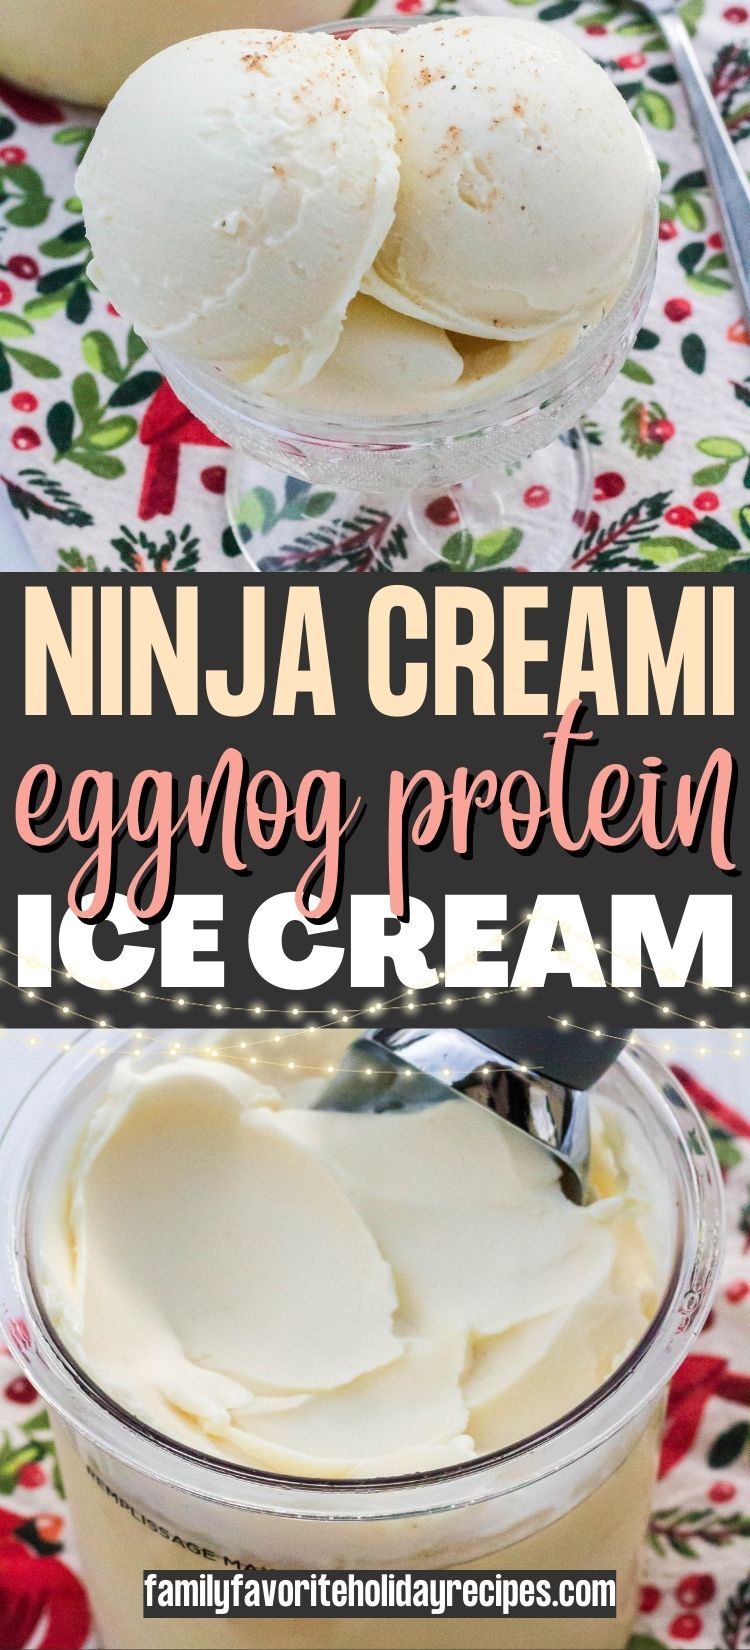 two photos of Ninja Creami eggnog protein ice cream, one shows scoops in a dish, the other shows the pint of ice cream.